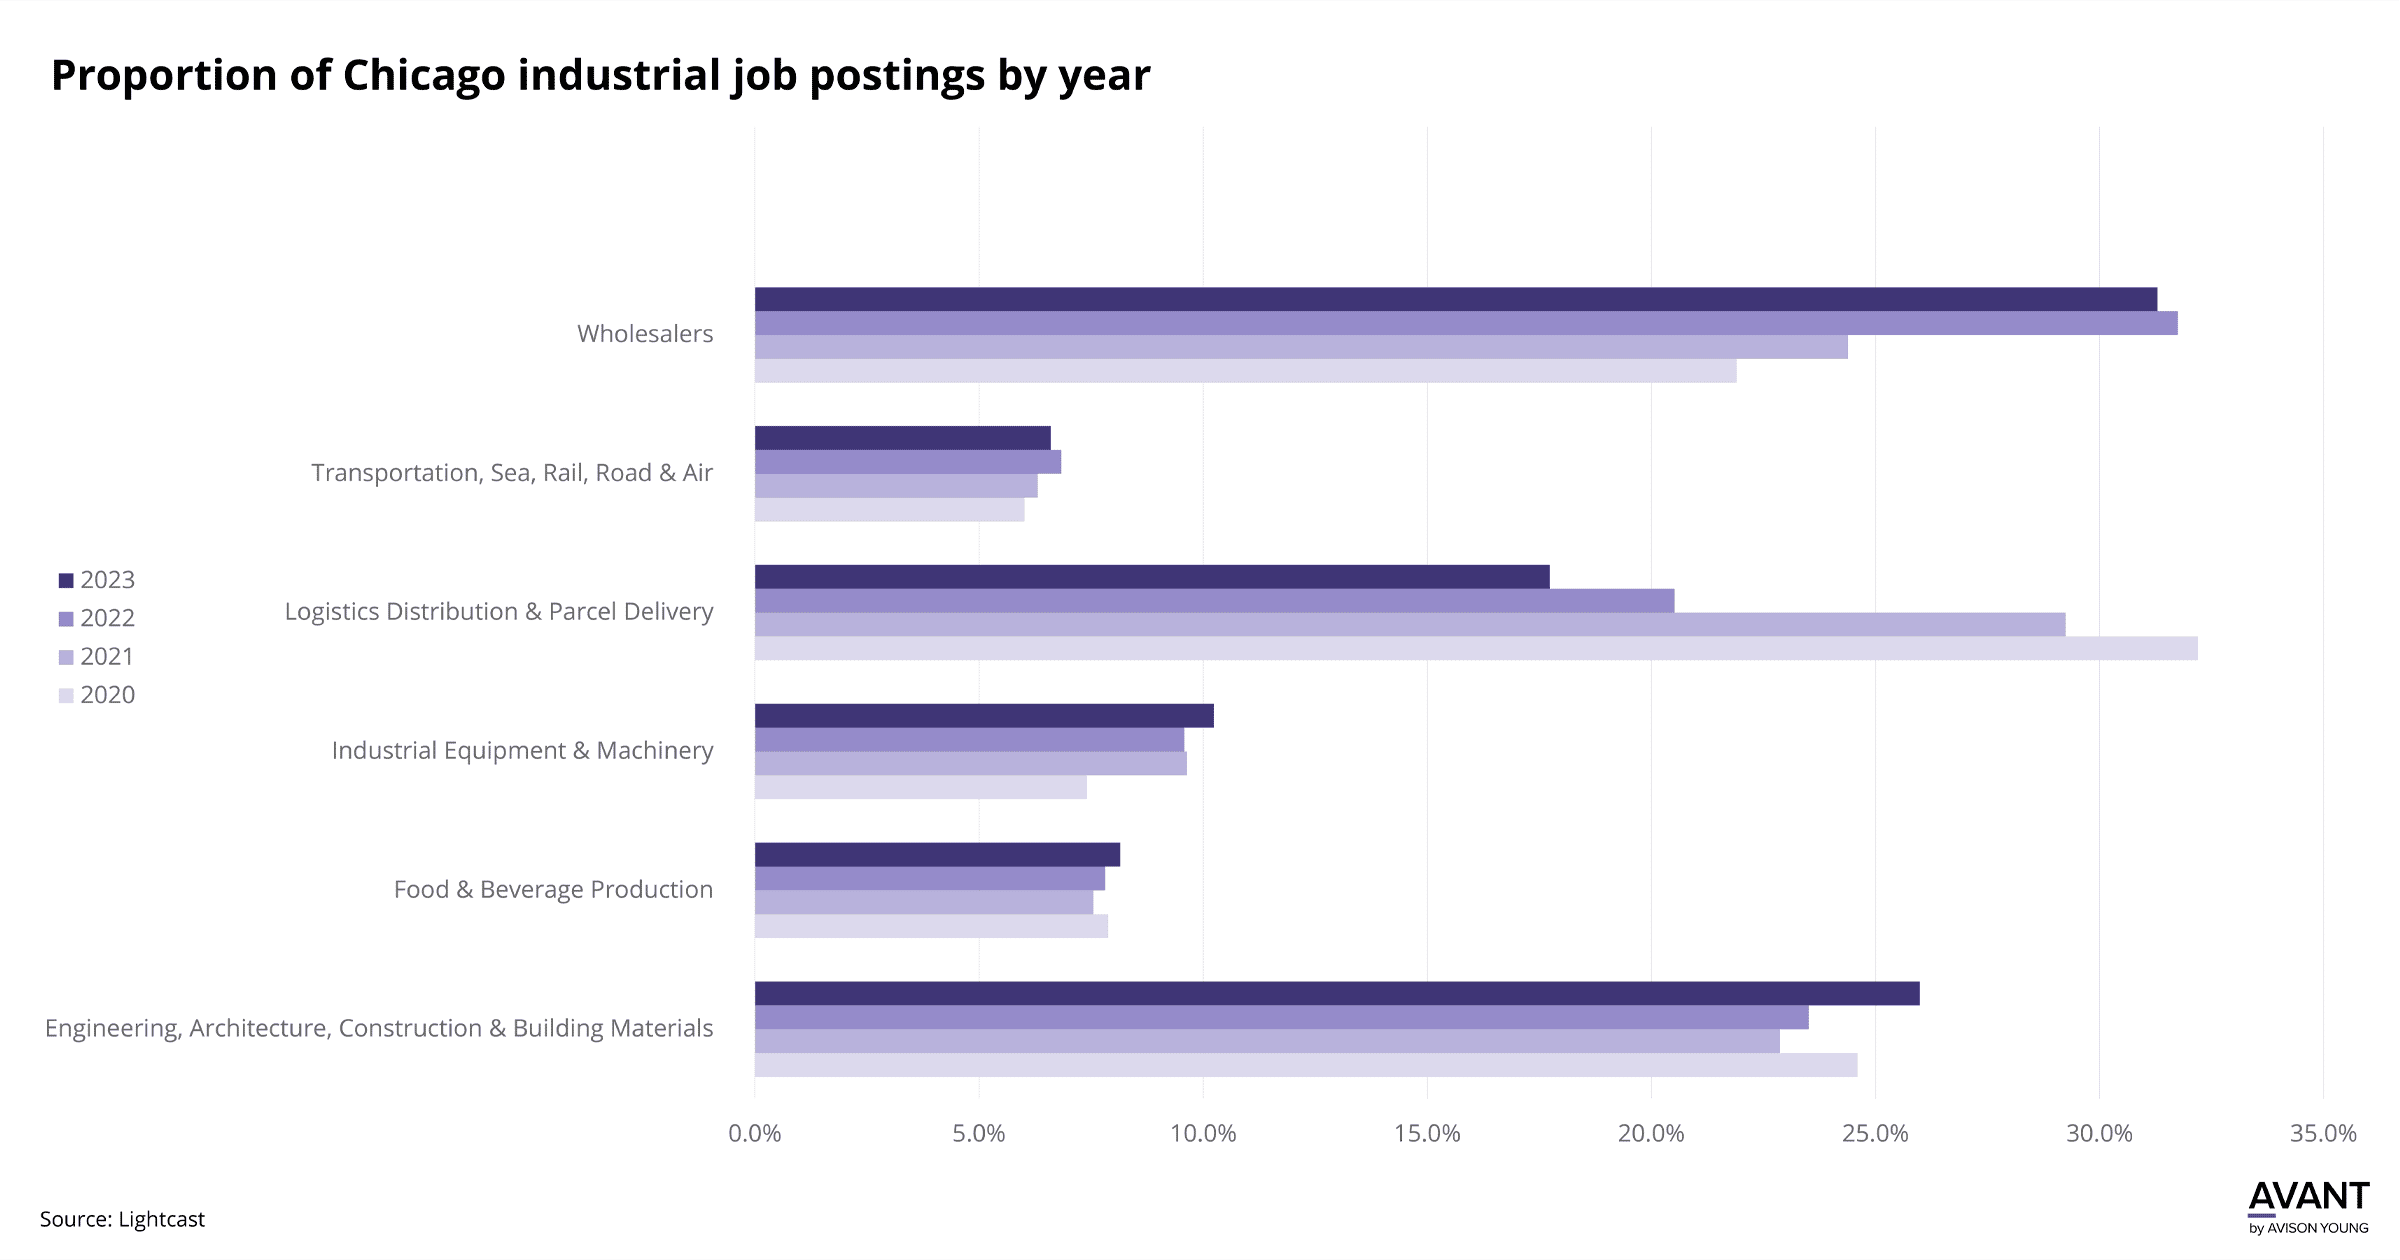 Chart shows proportion of different Chicago industrial job postings year by year from 2020 through 2023